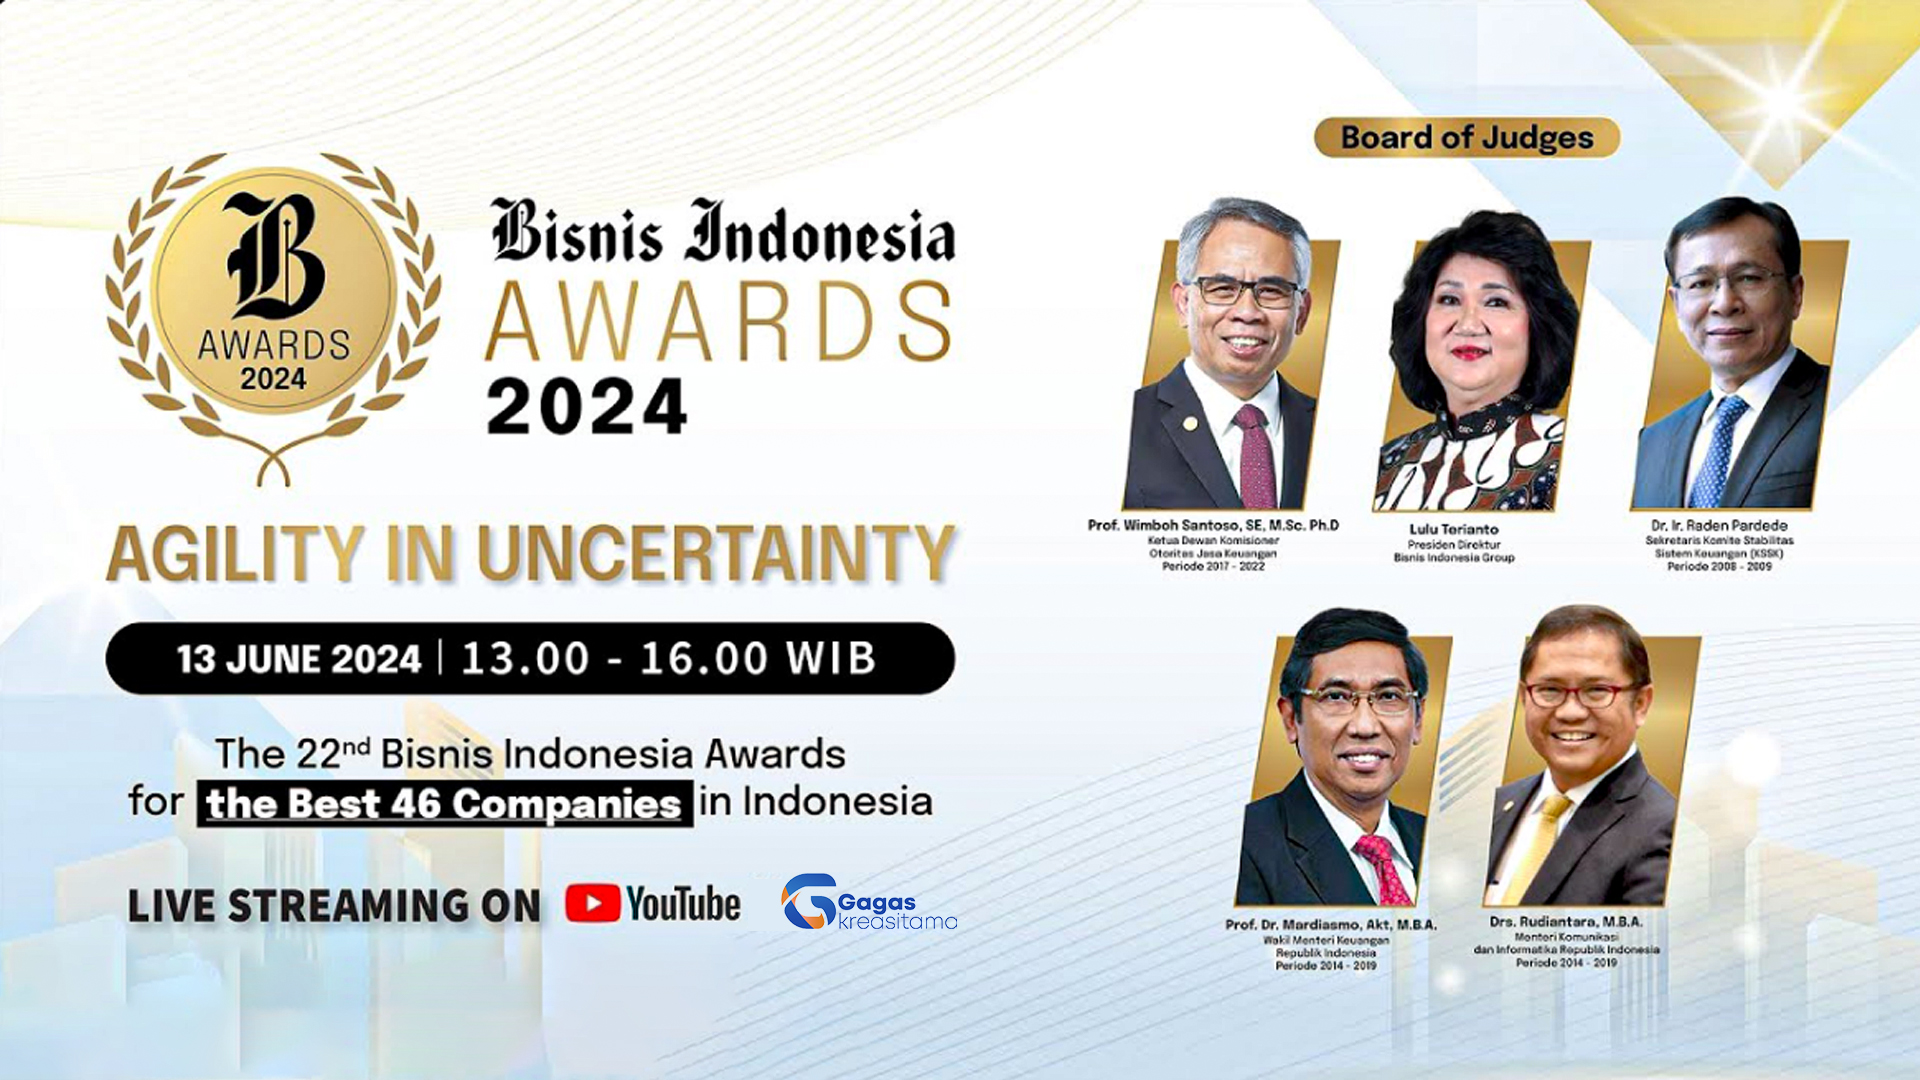 Bisnis Indonesia Awards 2024 "Agility in Uncertainty".